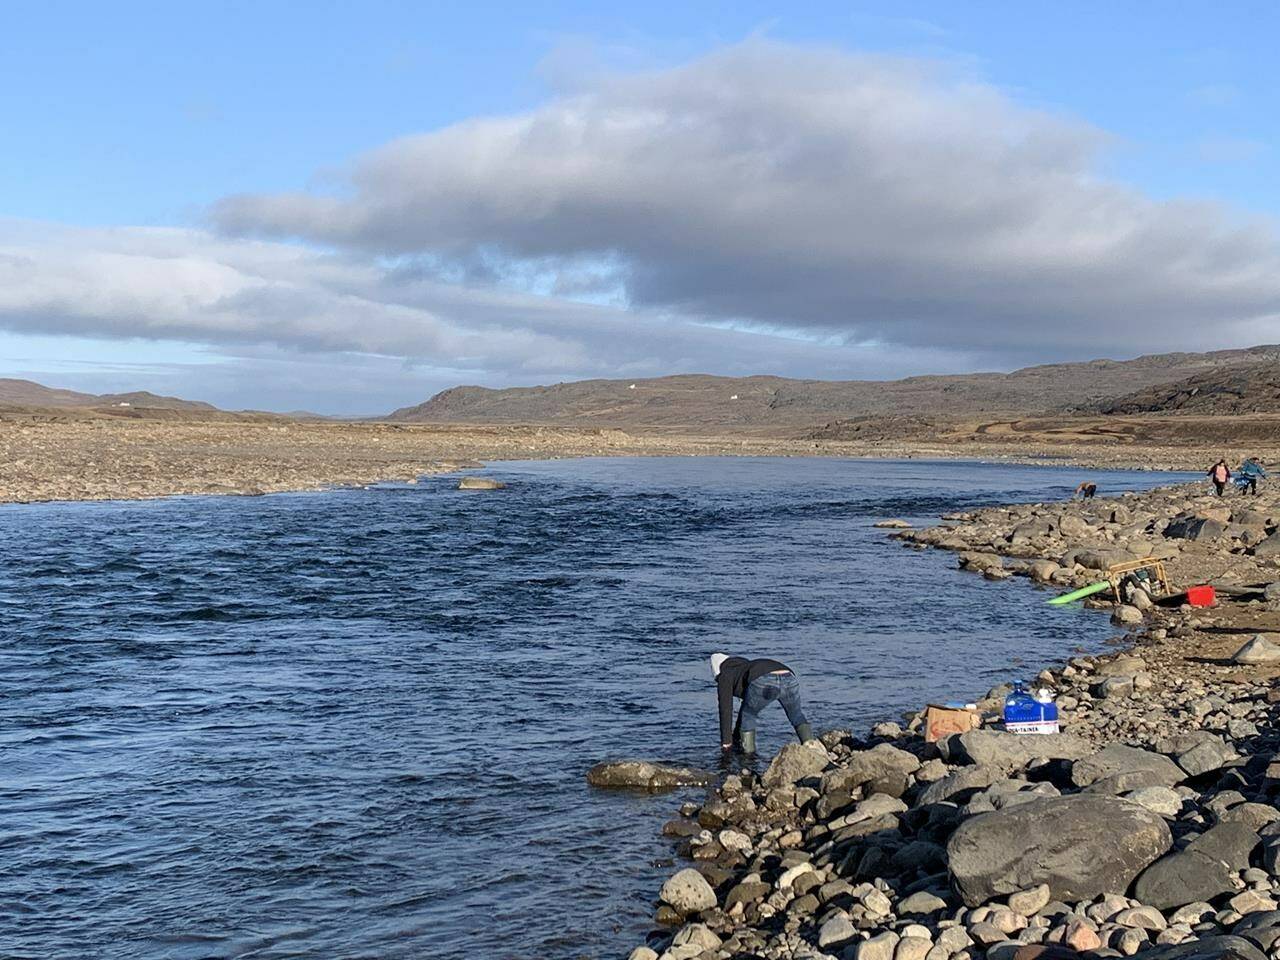 Residents collect water from the Sylvia Grinnell River near Iqaluit, Nunavut on Wednesday, Oct. 13, 2021. THE CANADIAN PRESS/Emma Tranter